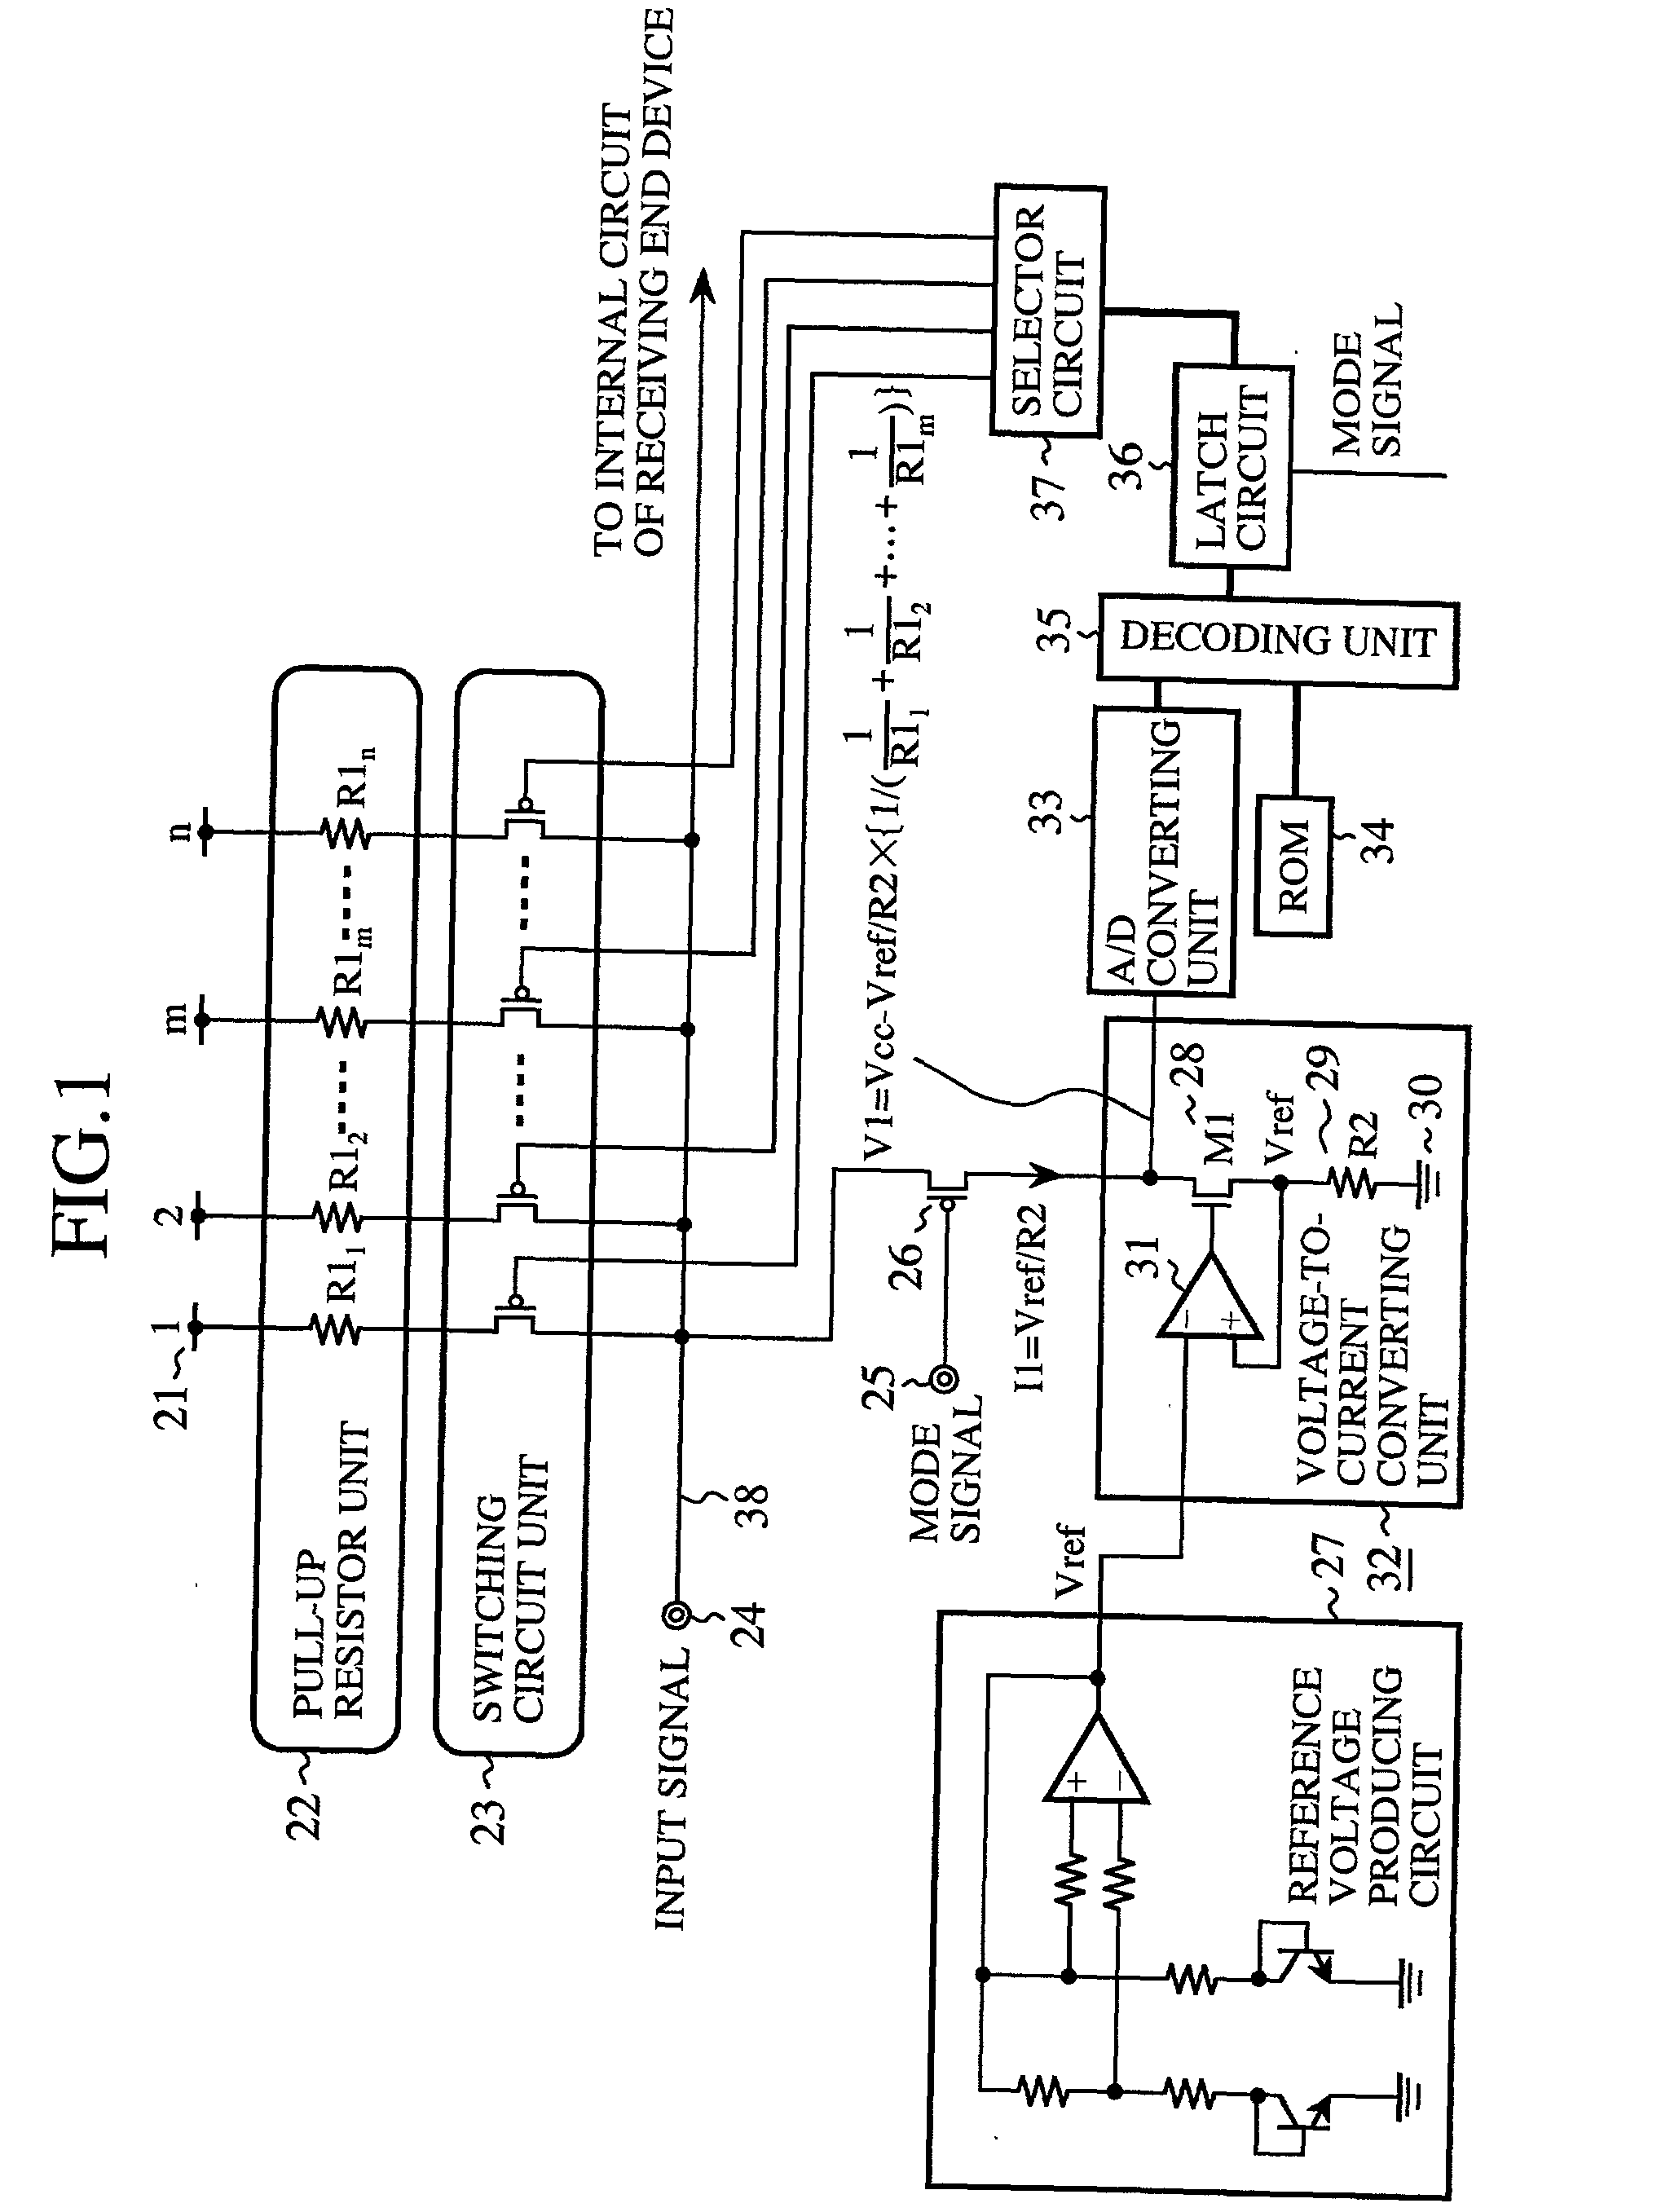 Resistance changeable device for data transmission system